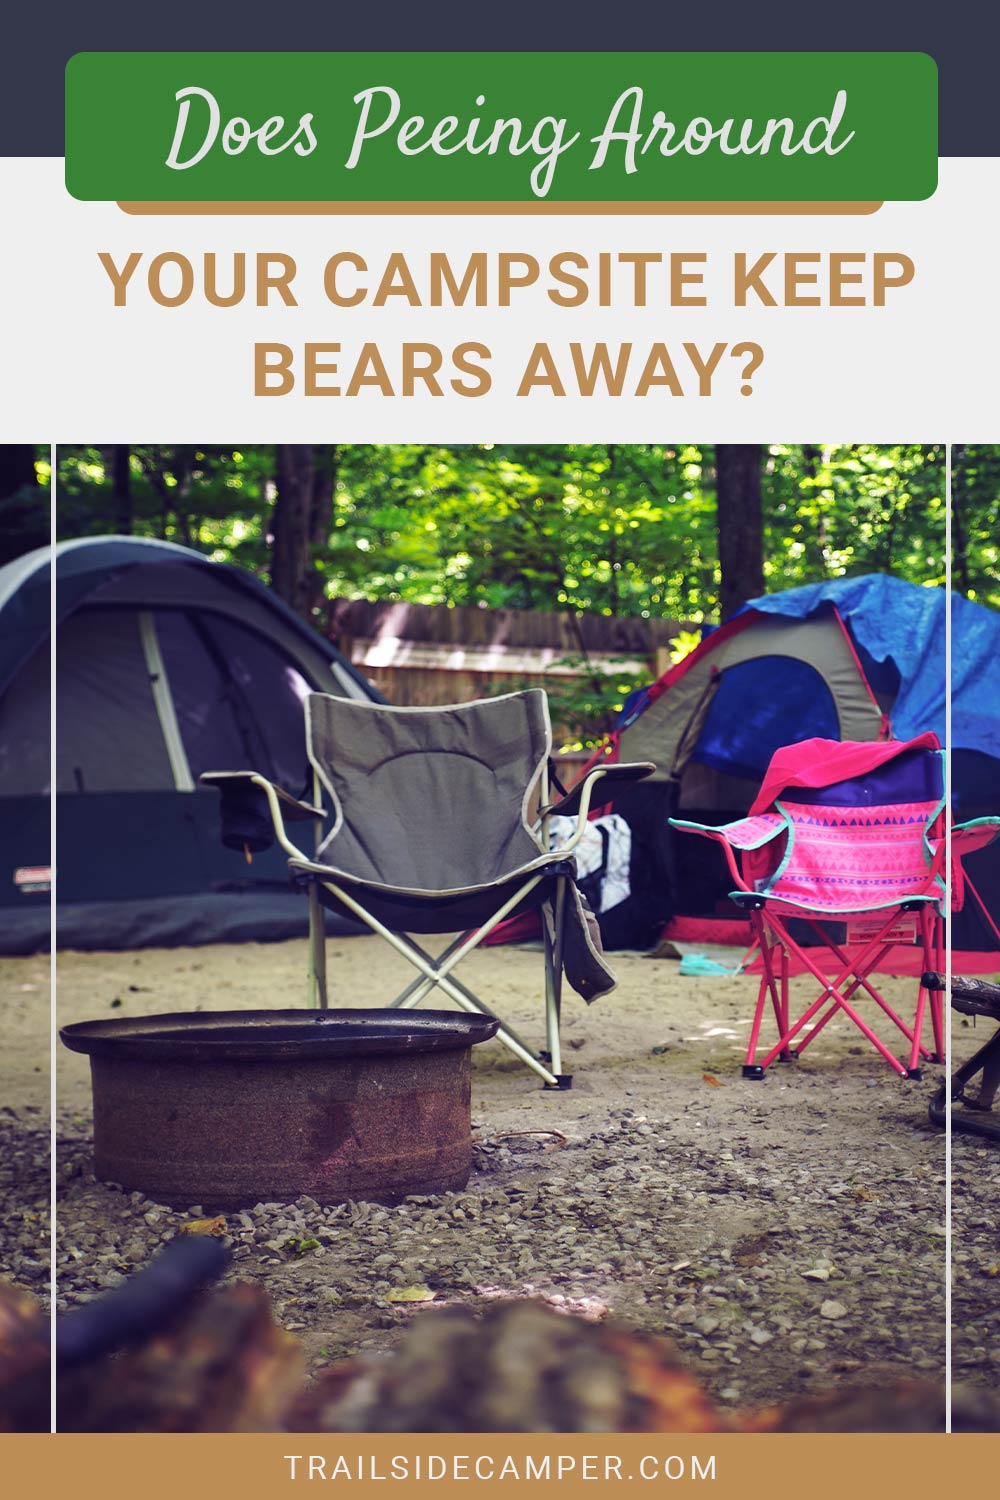 Two chairs in front of camping tents - Does Peeing Around Your Campsite Keep Bears Away?